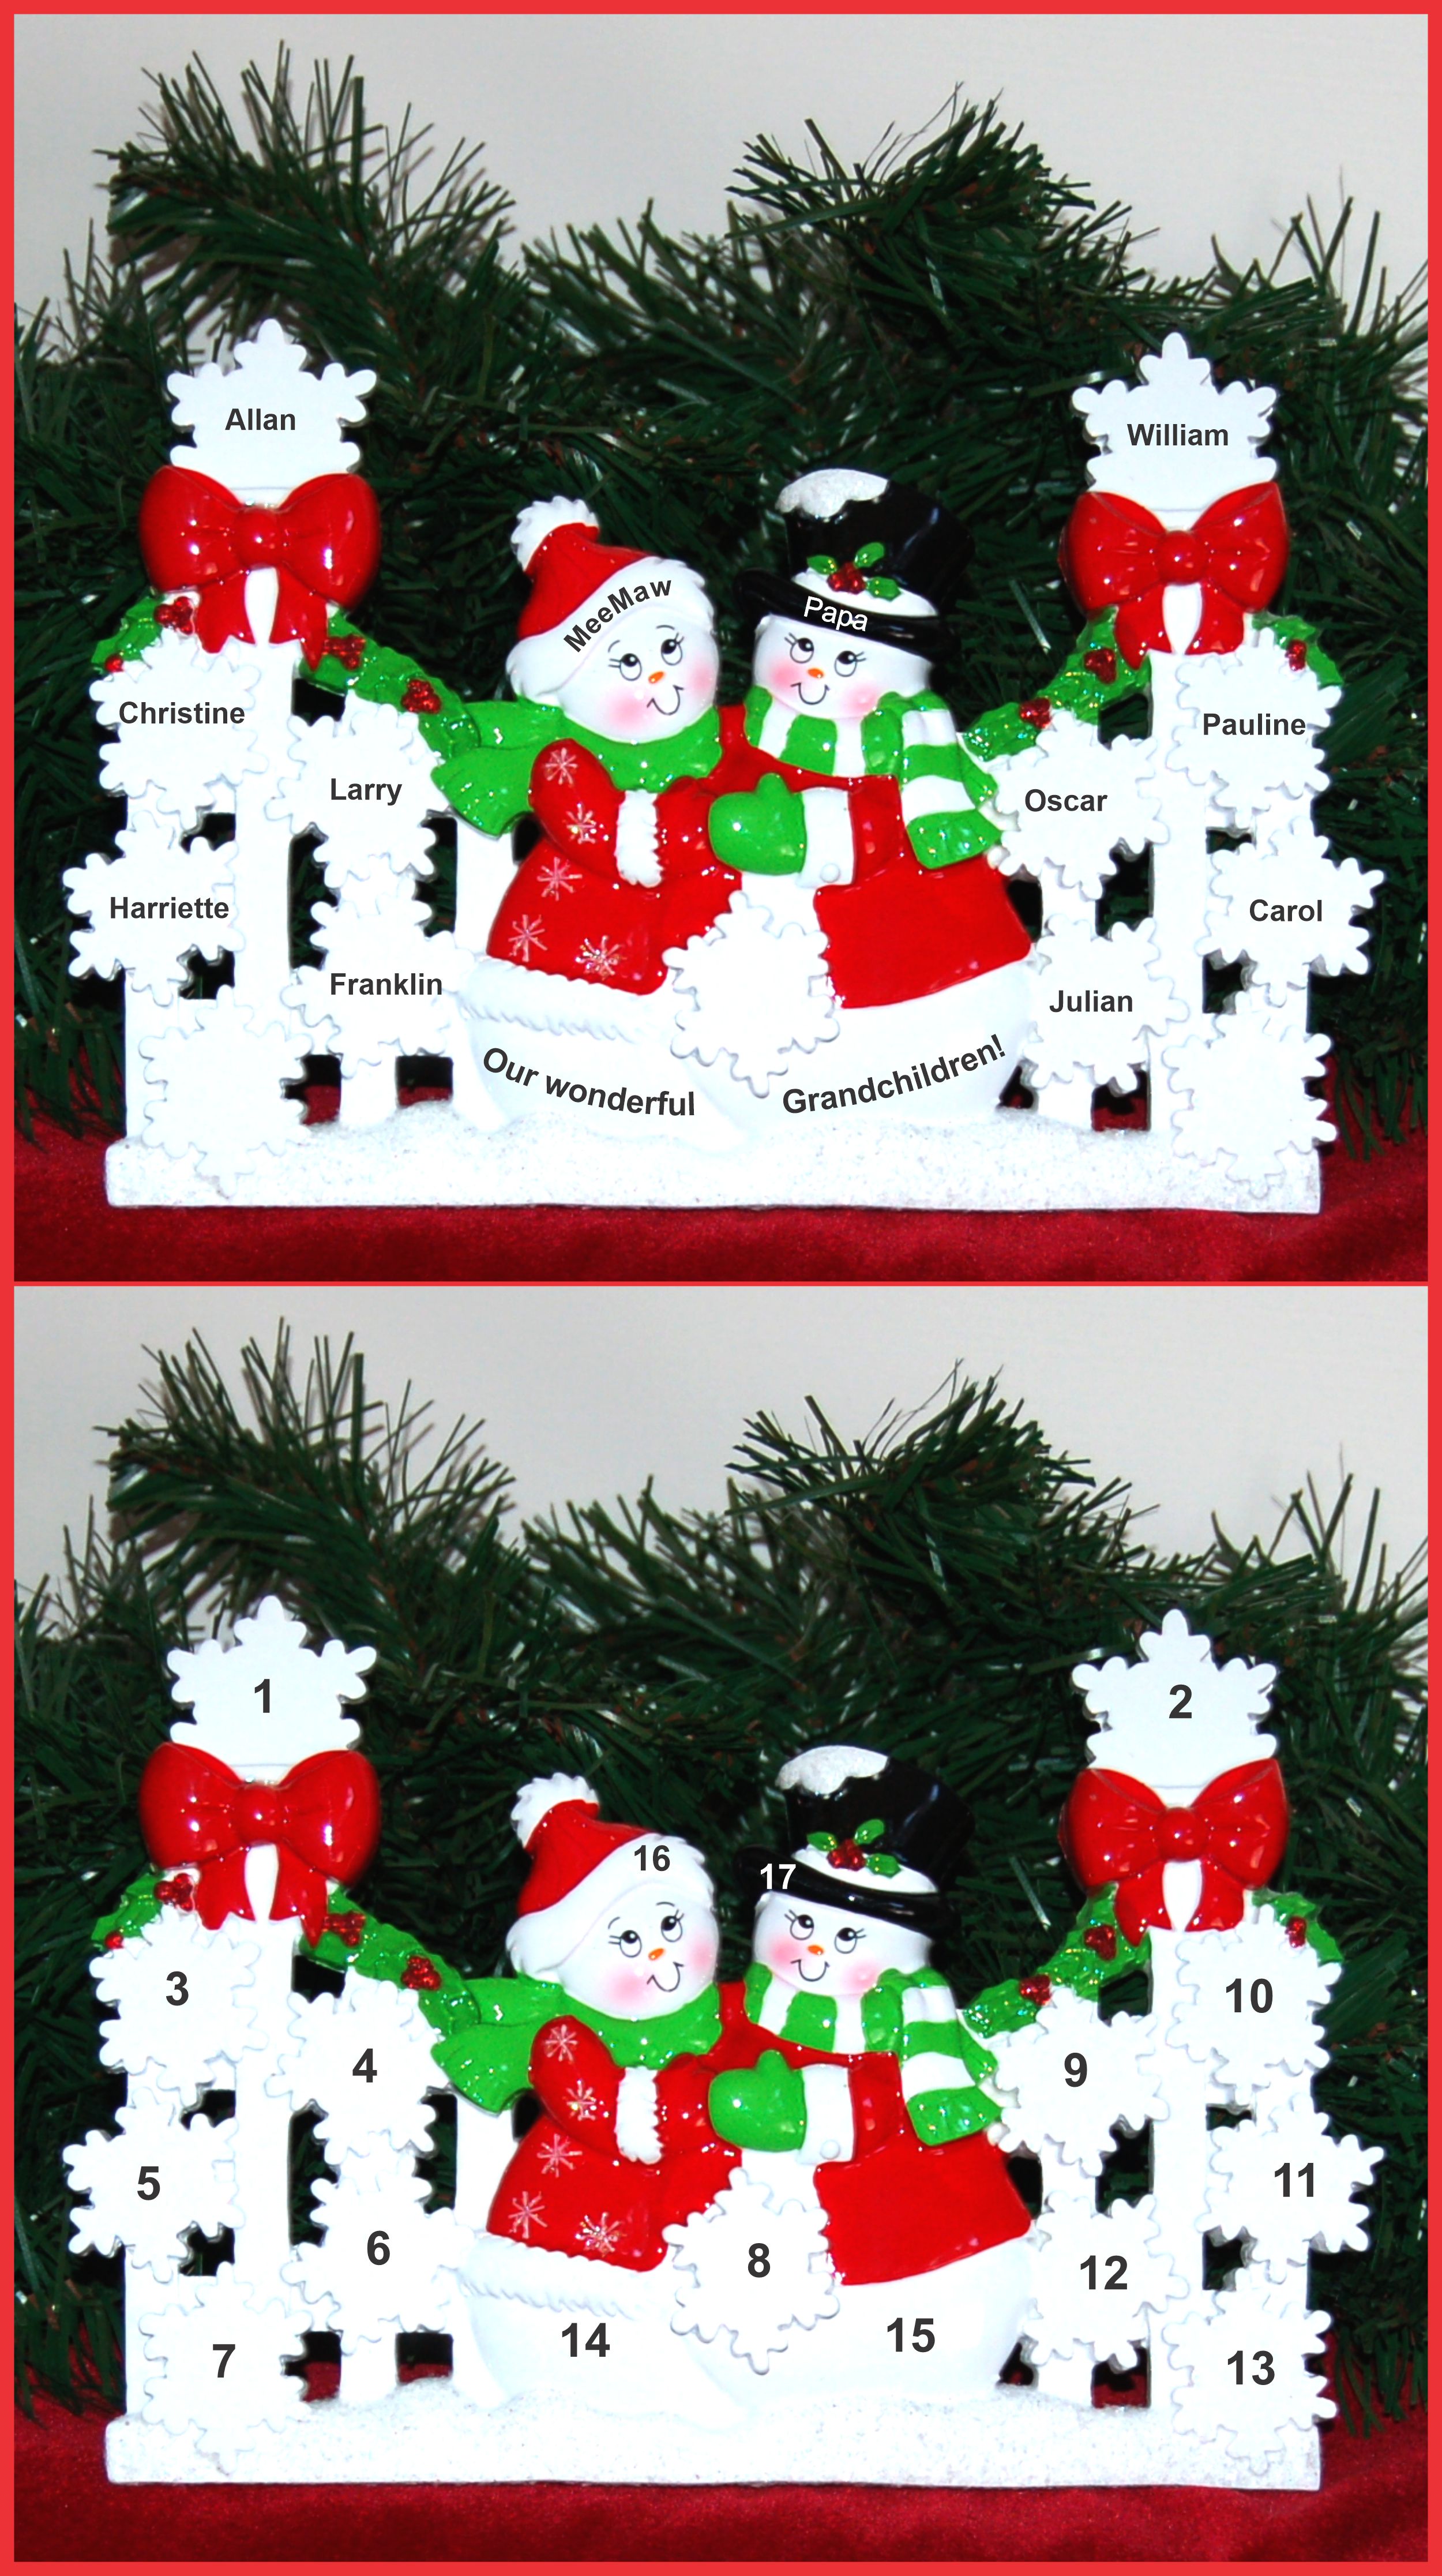 Personalized Grandparents Tabletop Christmas Decoration Snowflakes for 10 Grandchildren by Russell Rhodes